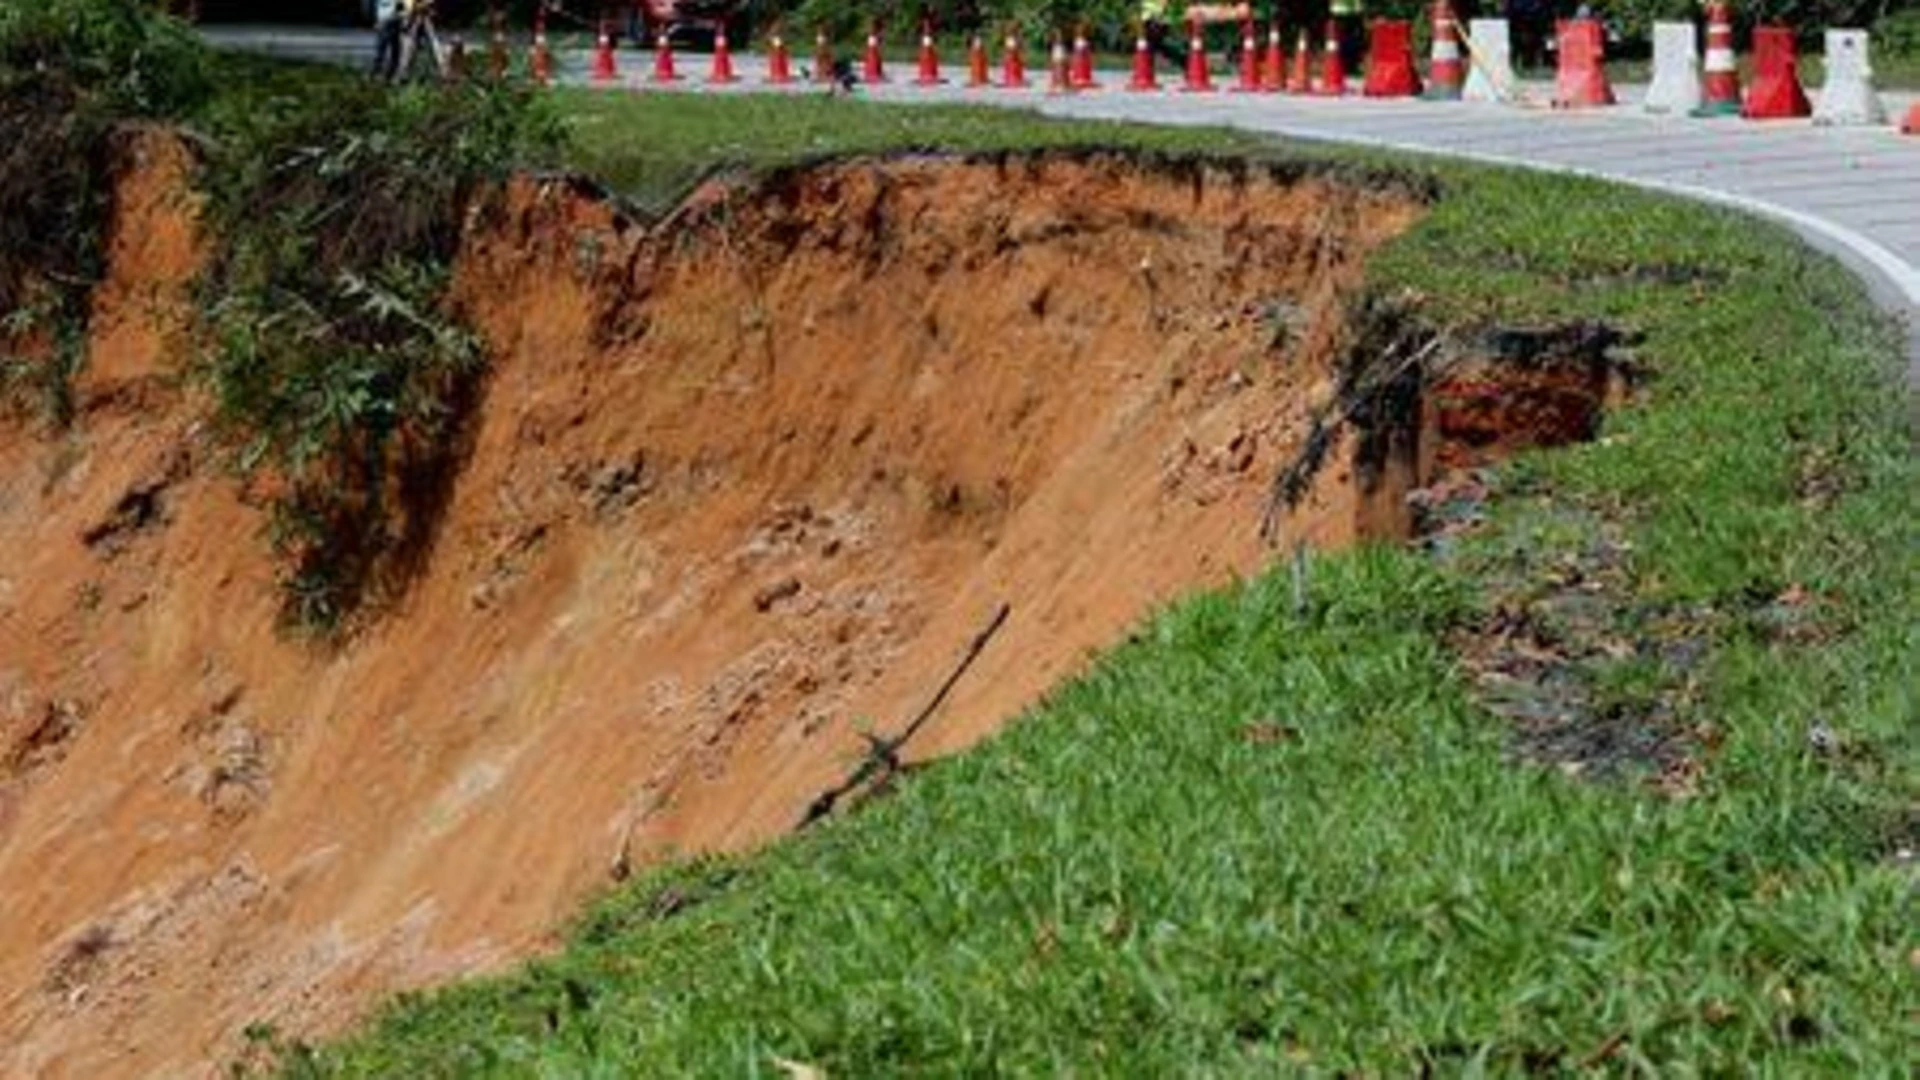 Worries As Malaysian Landslide Claims 16 Lives, Others Still Missing